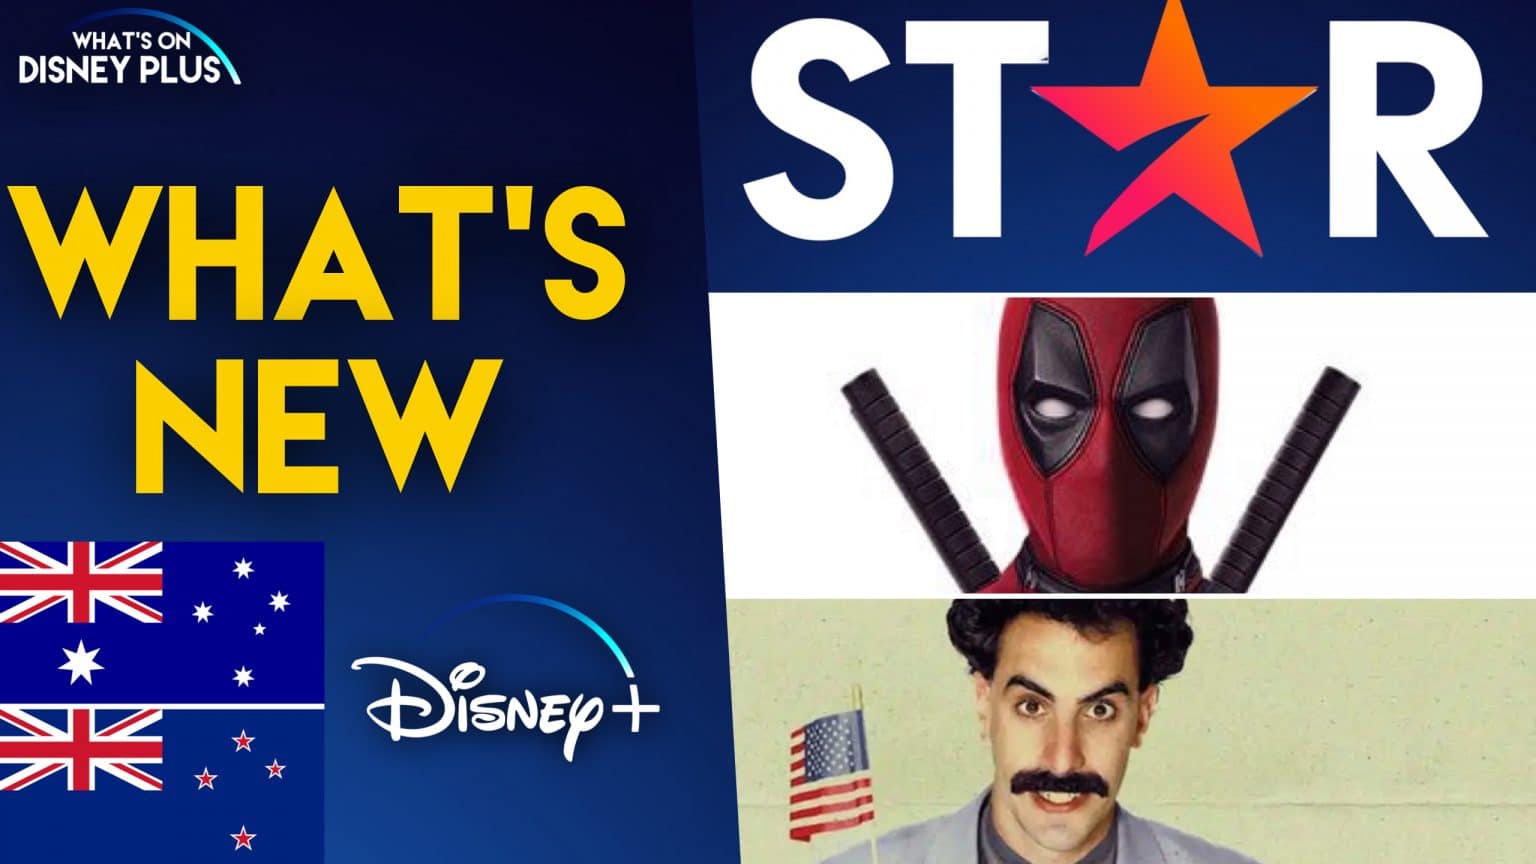 Whats New On Disney Star Launches Australianew Zealand Whats On Disney Plus 